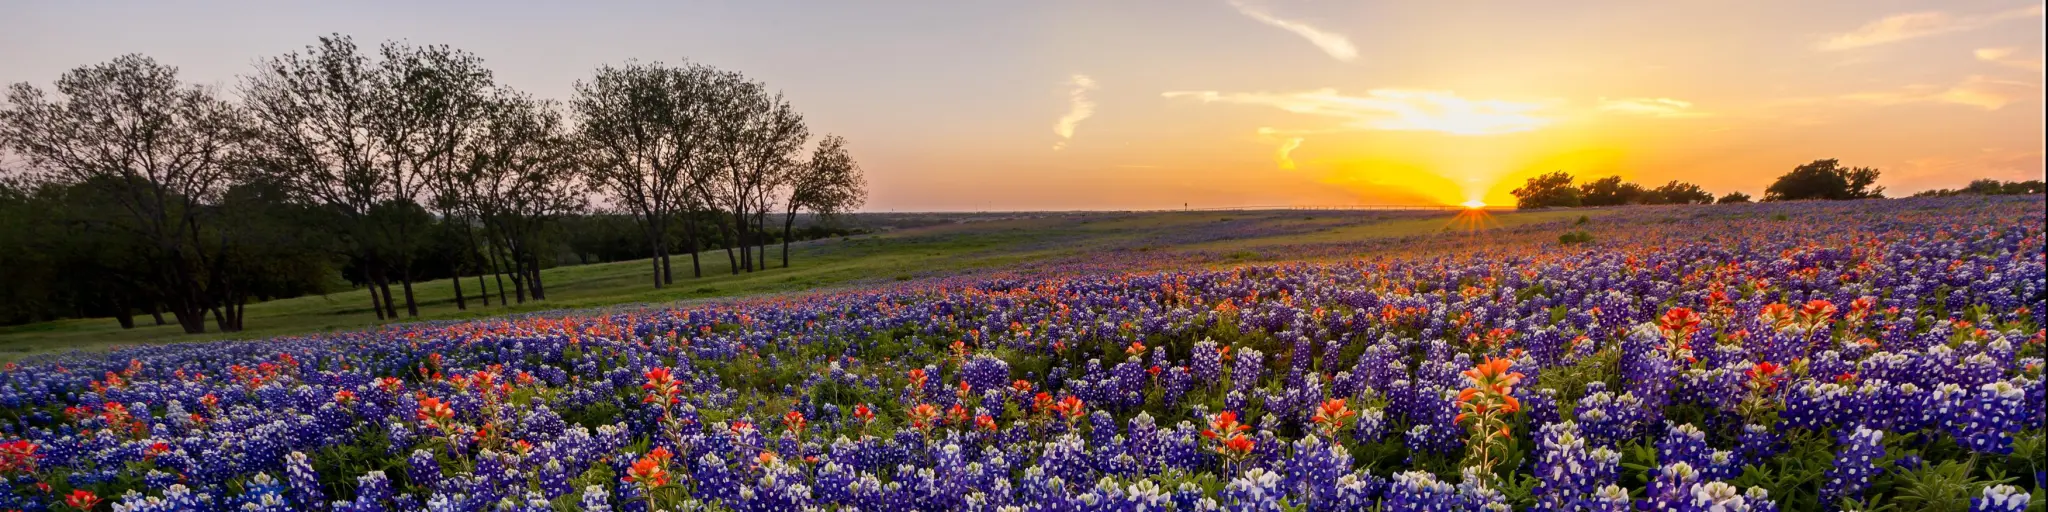 Red, white and blue flowers emblematic of Texas, with sunset behind